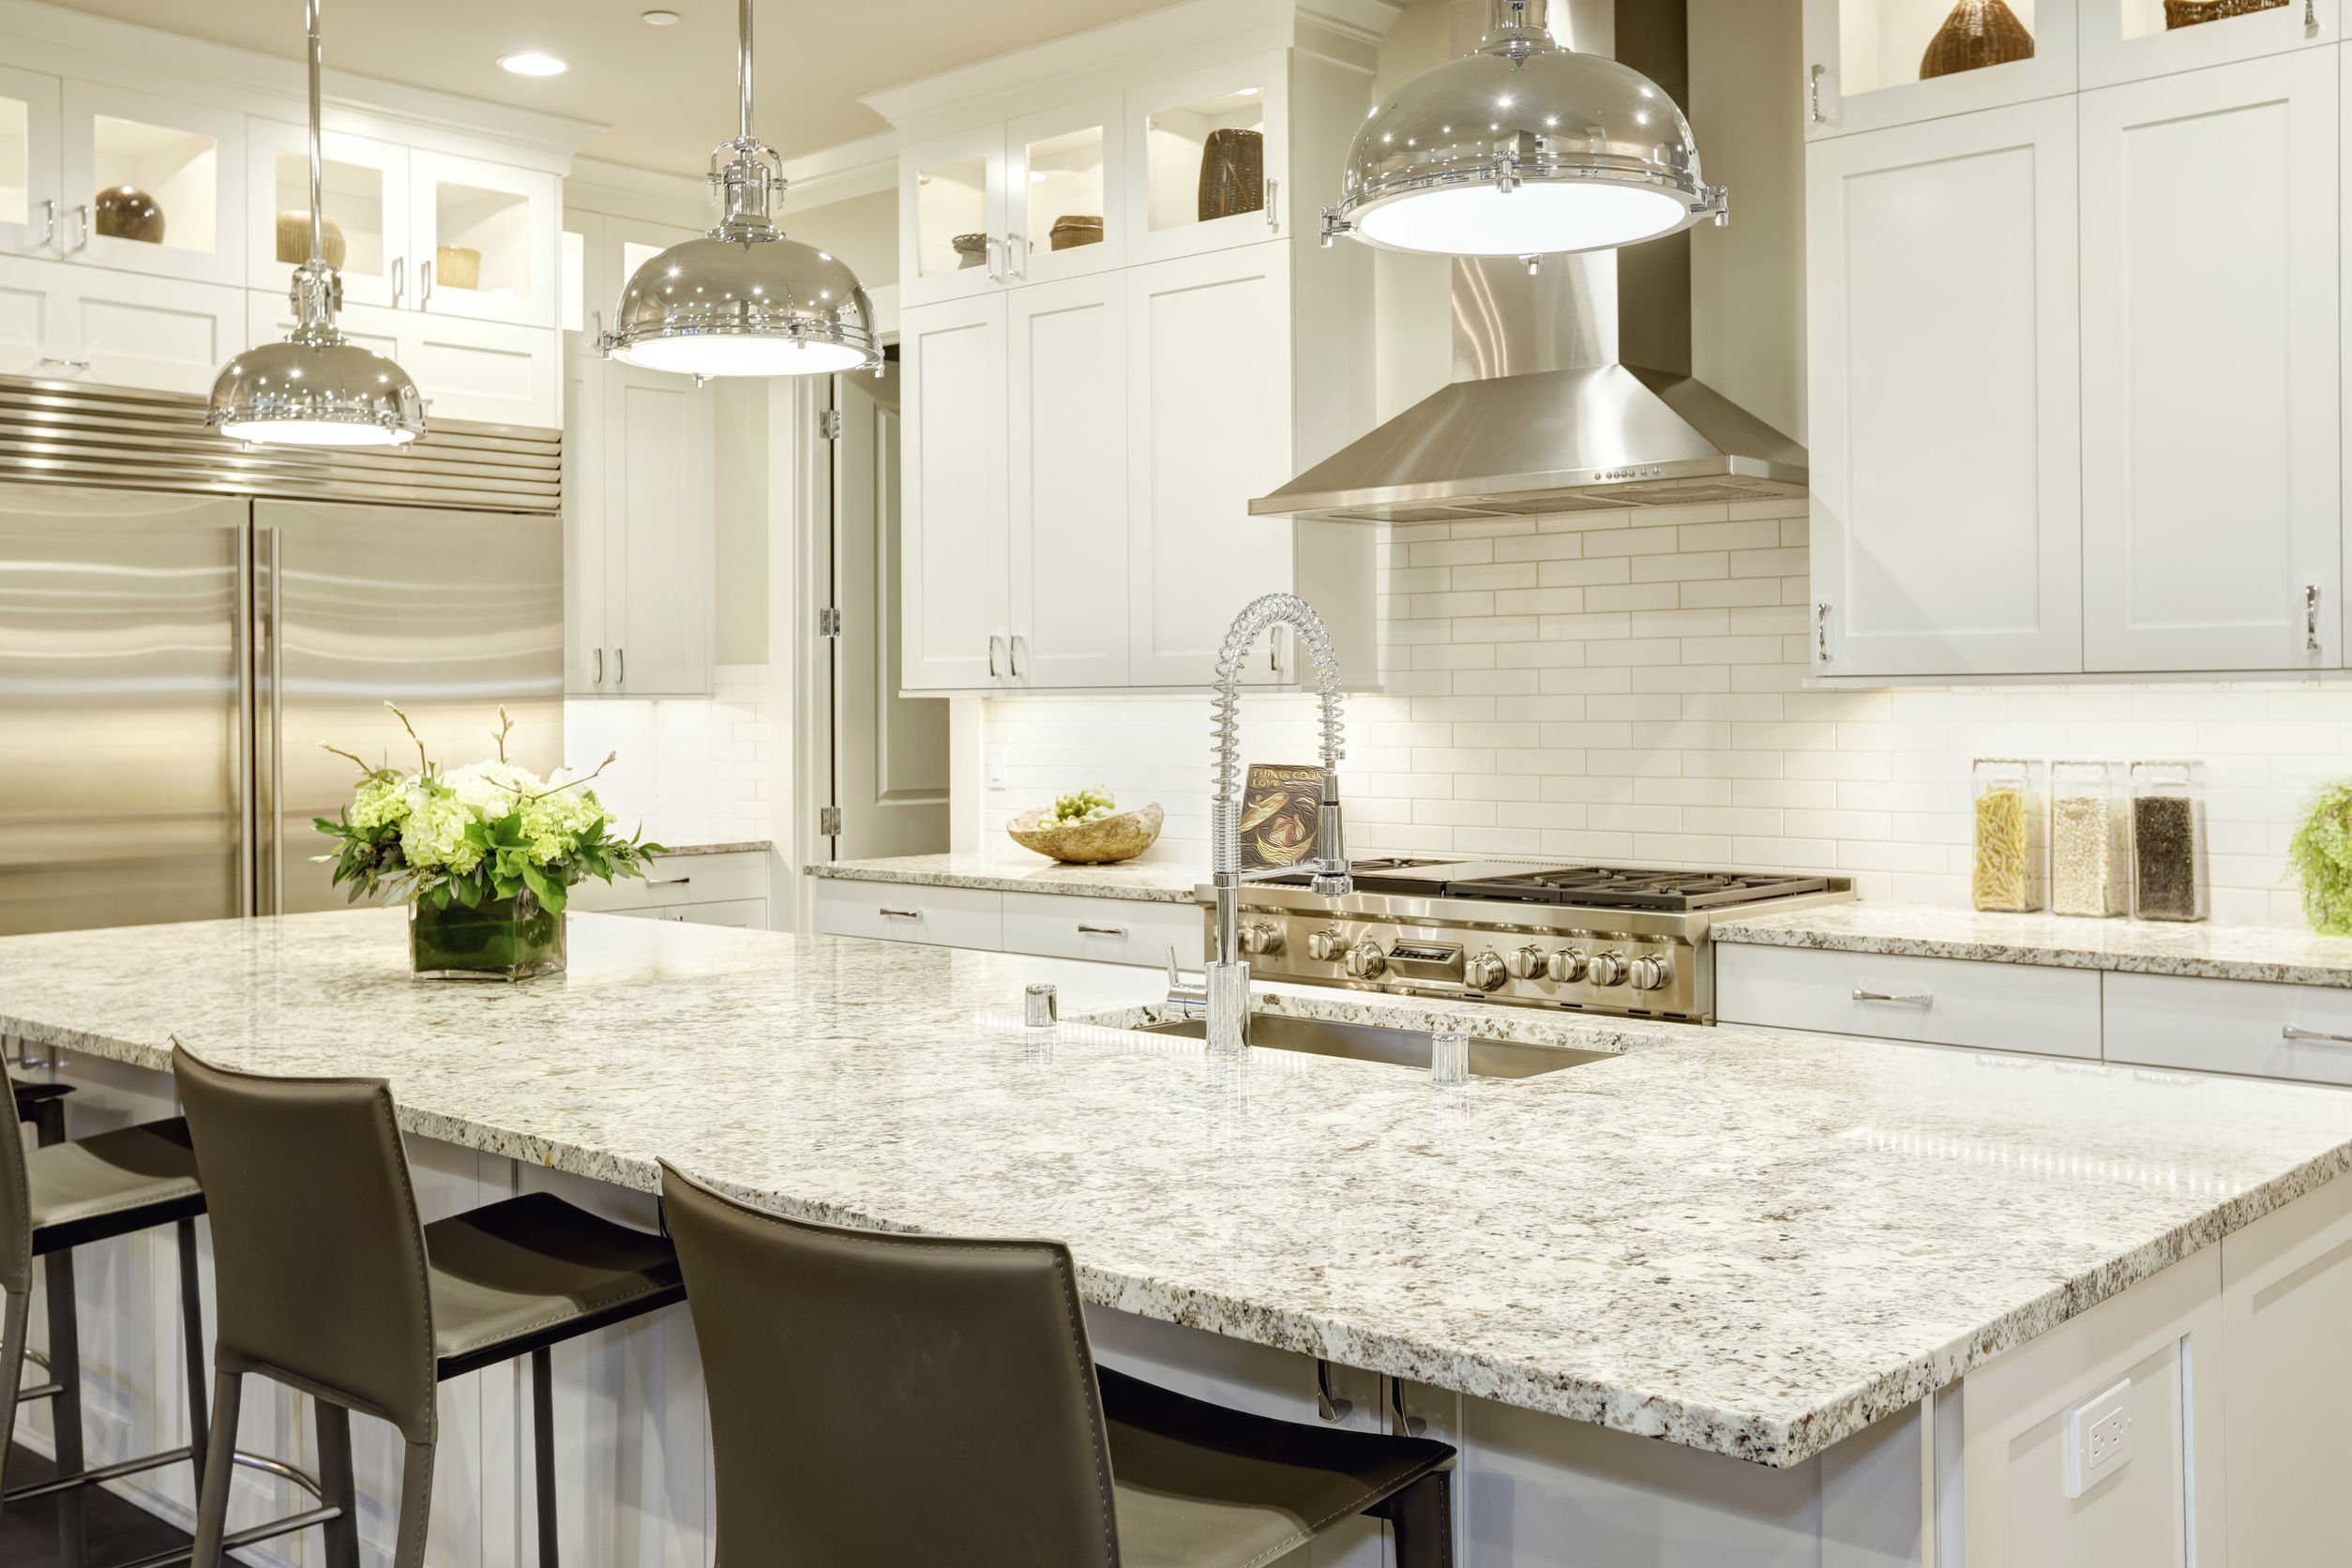 What You Don’t Know About Granite